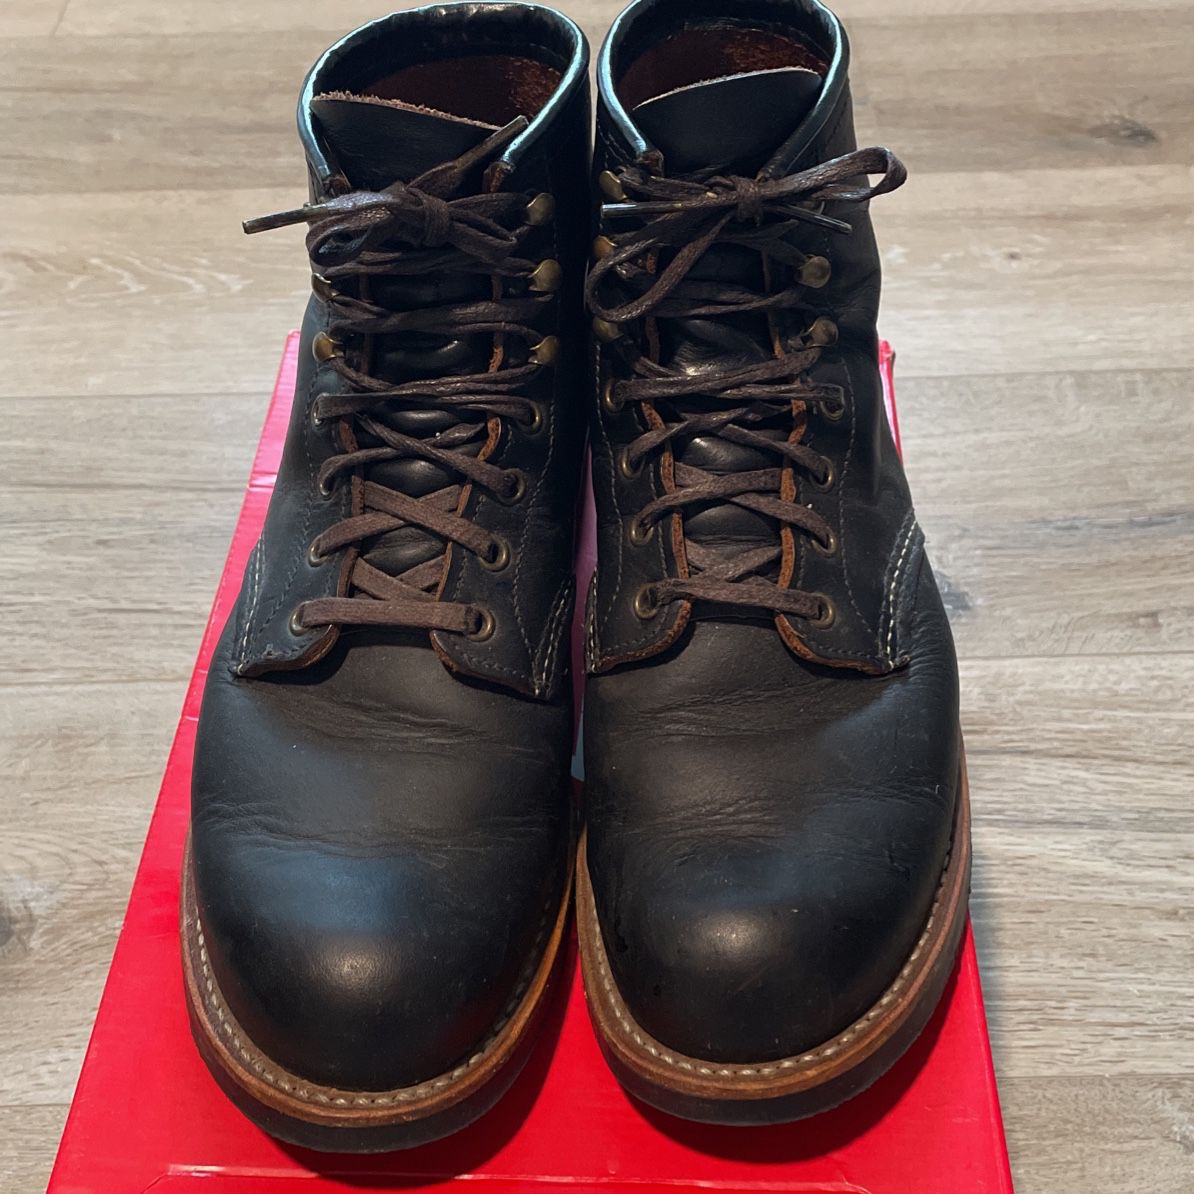 Red Wing Women Work Boot for Sale in Renton, WA - OfferUp